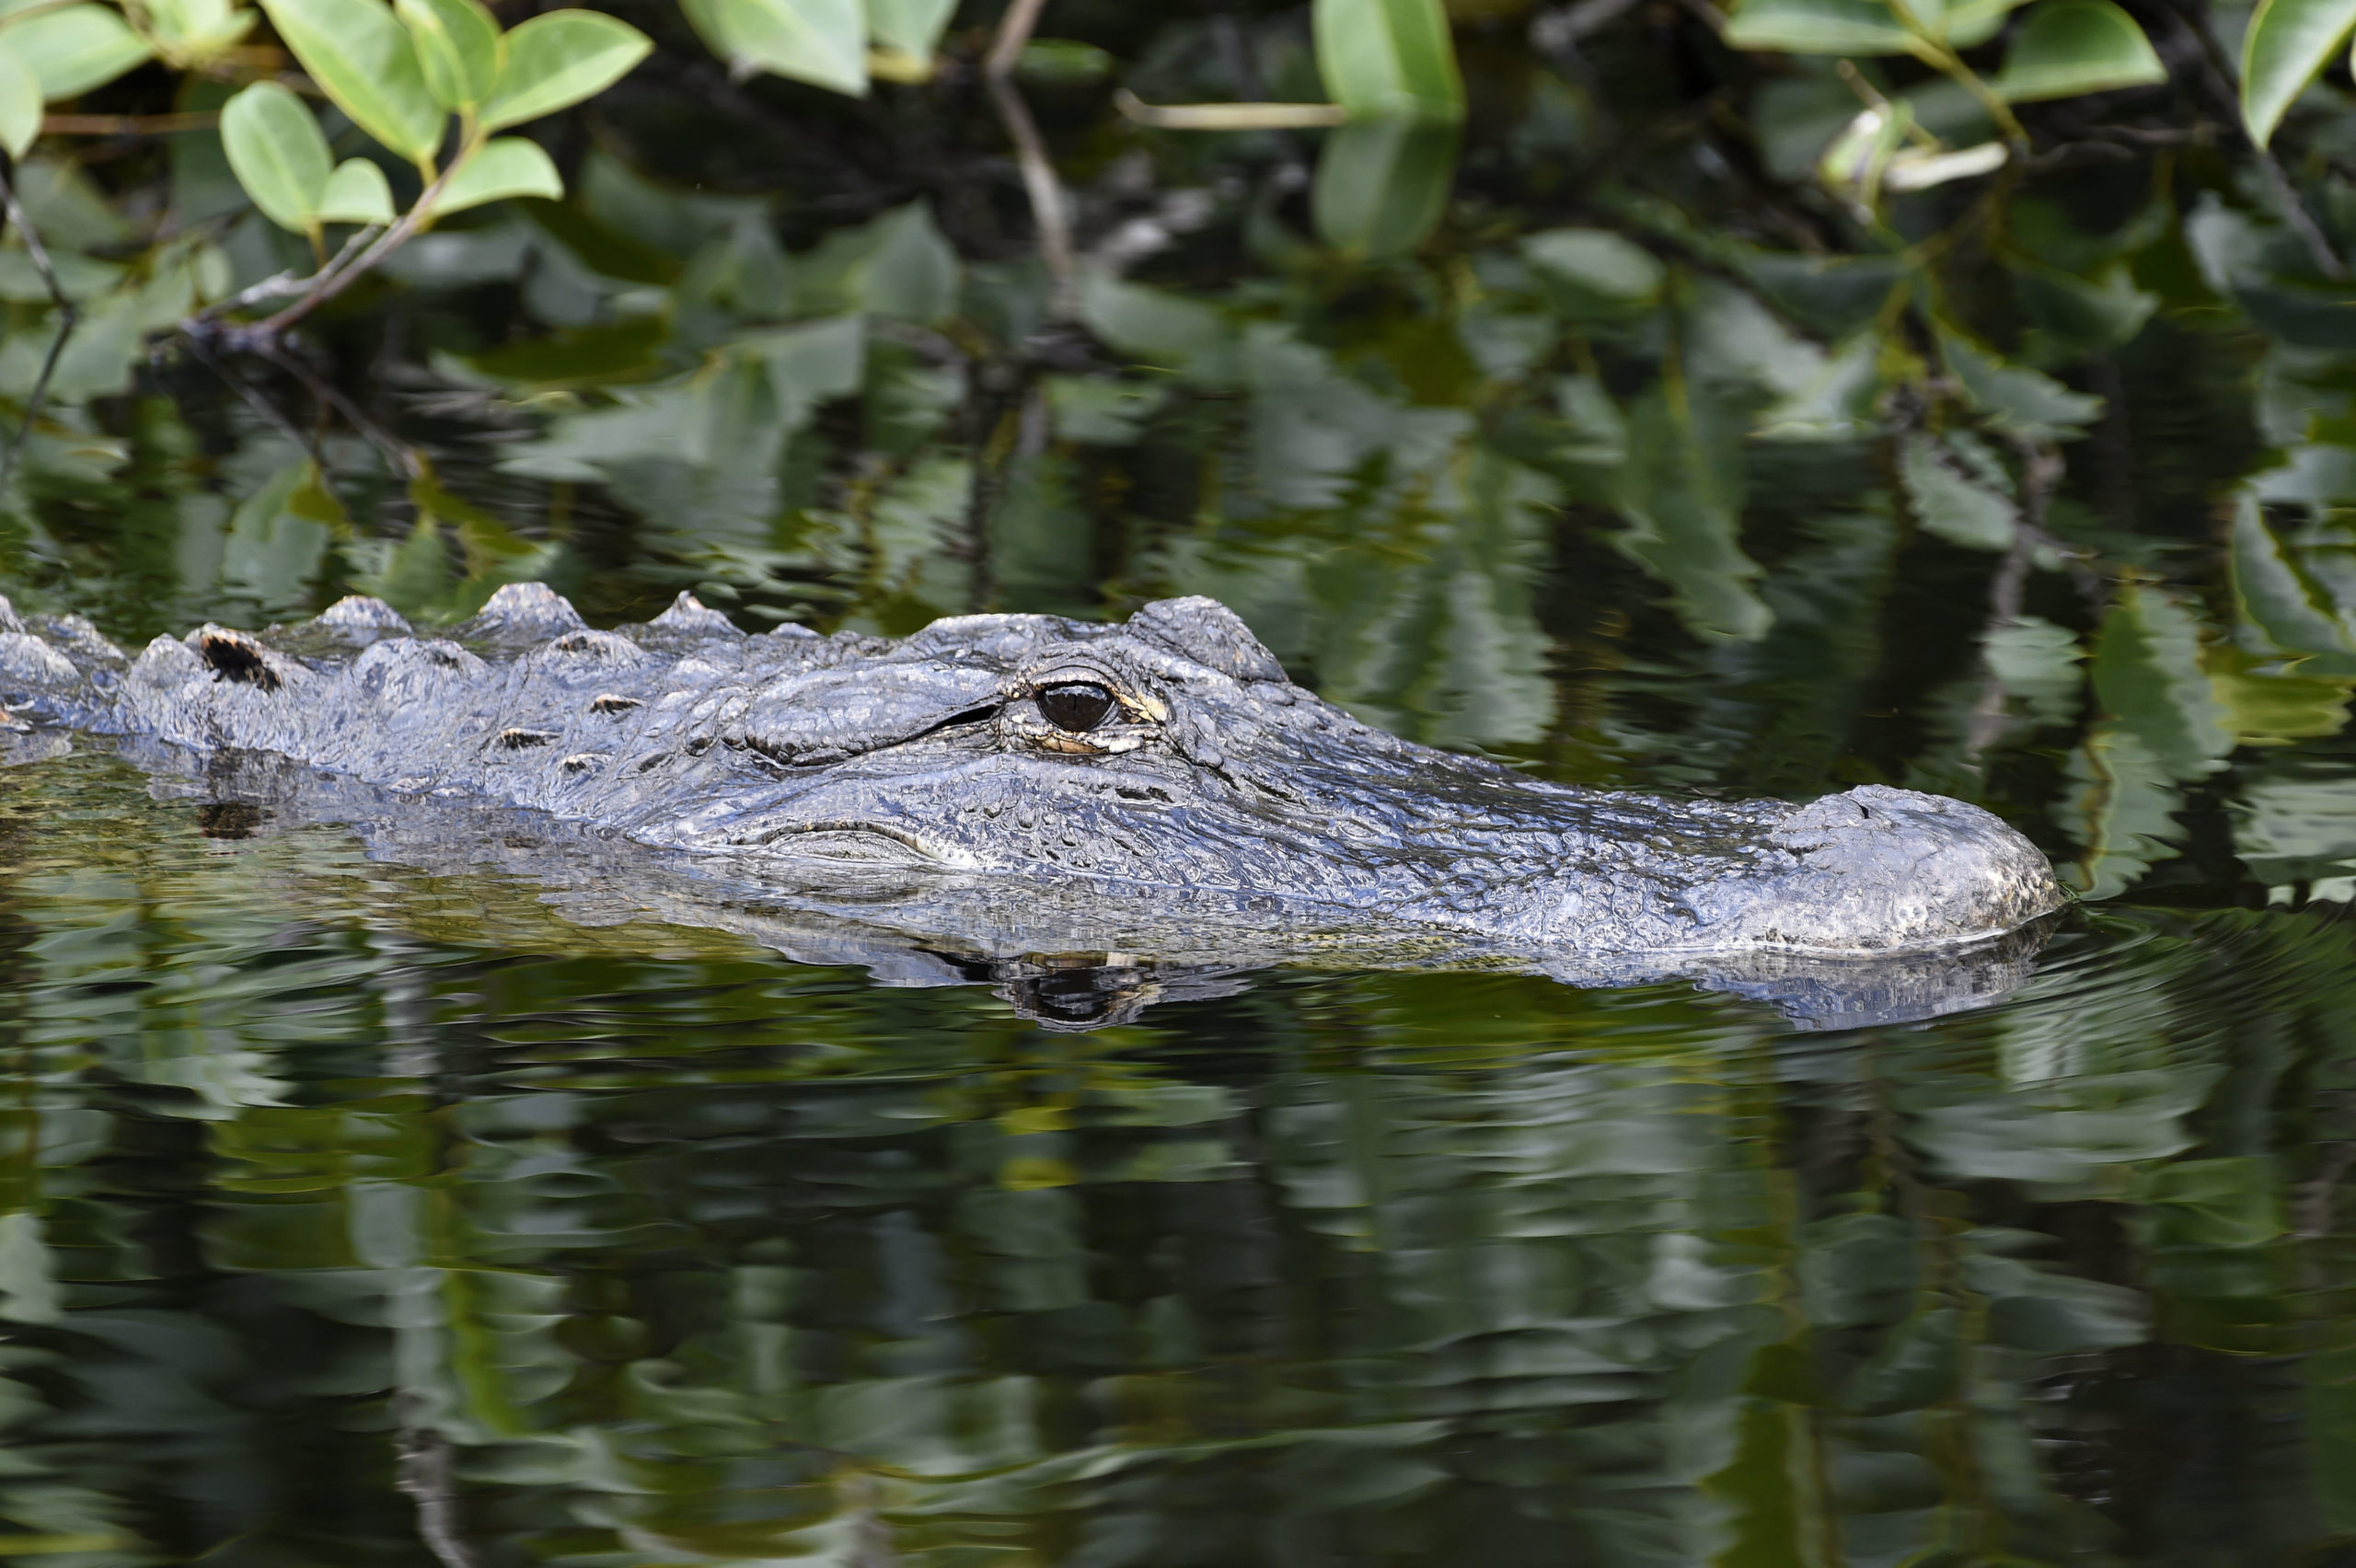 An American Alligator swims in it's natural habitat in a canal in Shark Valley, Everglades National Park, Florida, on June 23, 2016. Florida, famed for its turquoise beaches, is almost as well known for its alligators. Humans are not their favorite meal, but one would not know that from the recent series of alarming gator attacks on people. "Encounters between gators, humans on rise in Florida" (RHONA WISE/AFP via Getty Images)